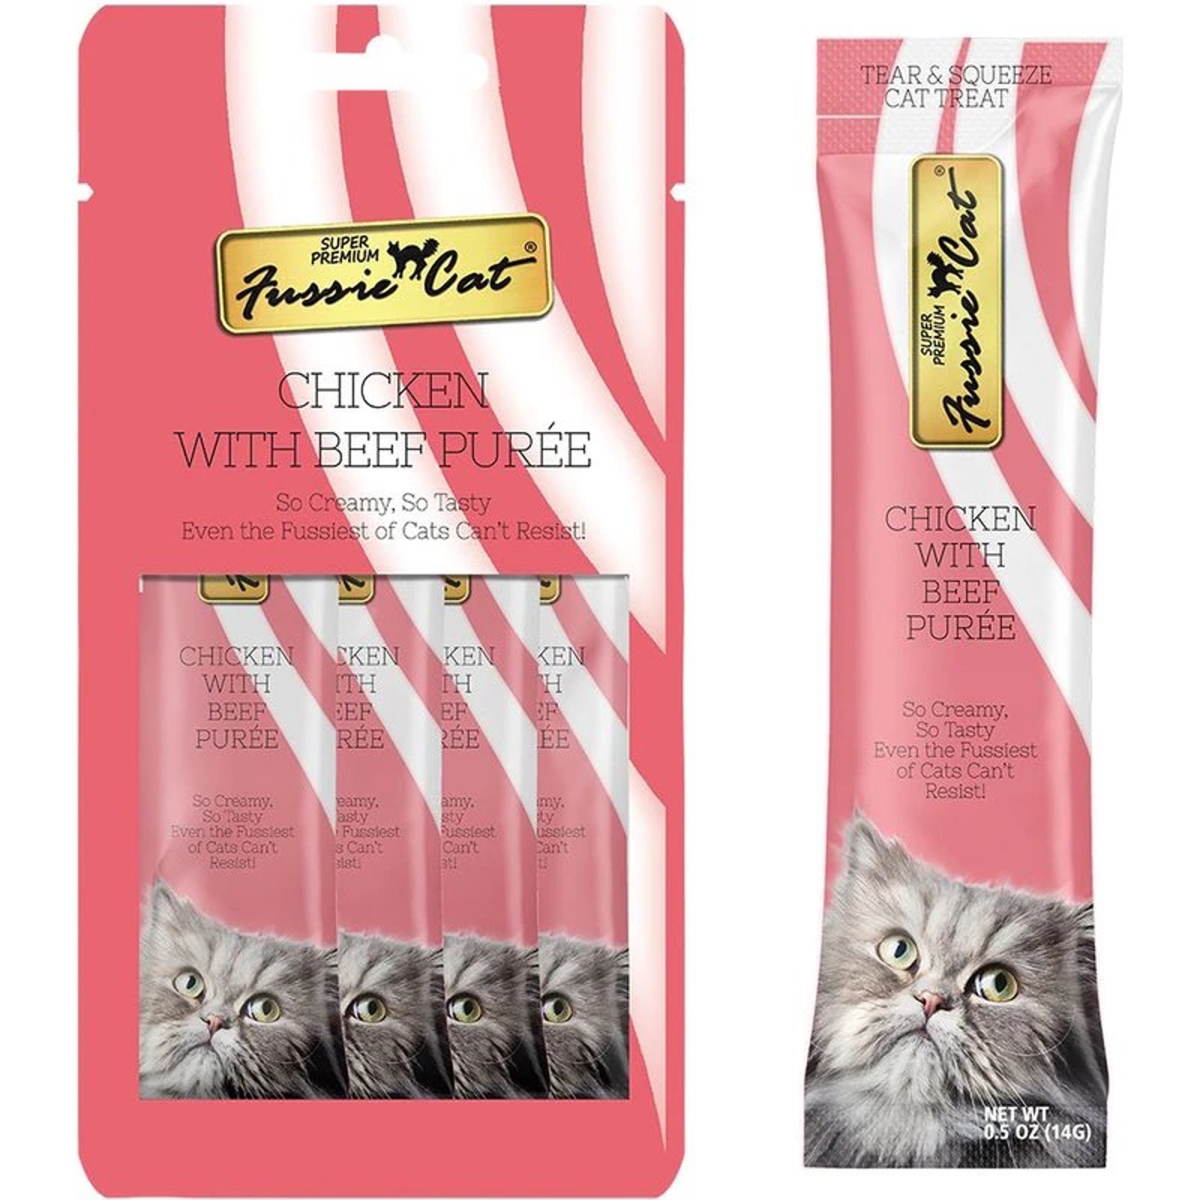 Picture of Fussie Cat 888641139354 2 oz Chicken Cat Treat with Beef Puree - 18 Count